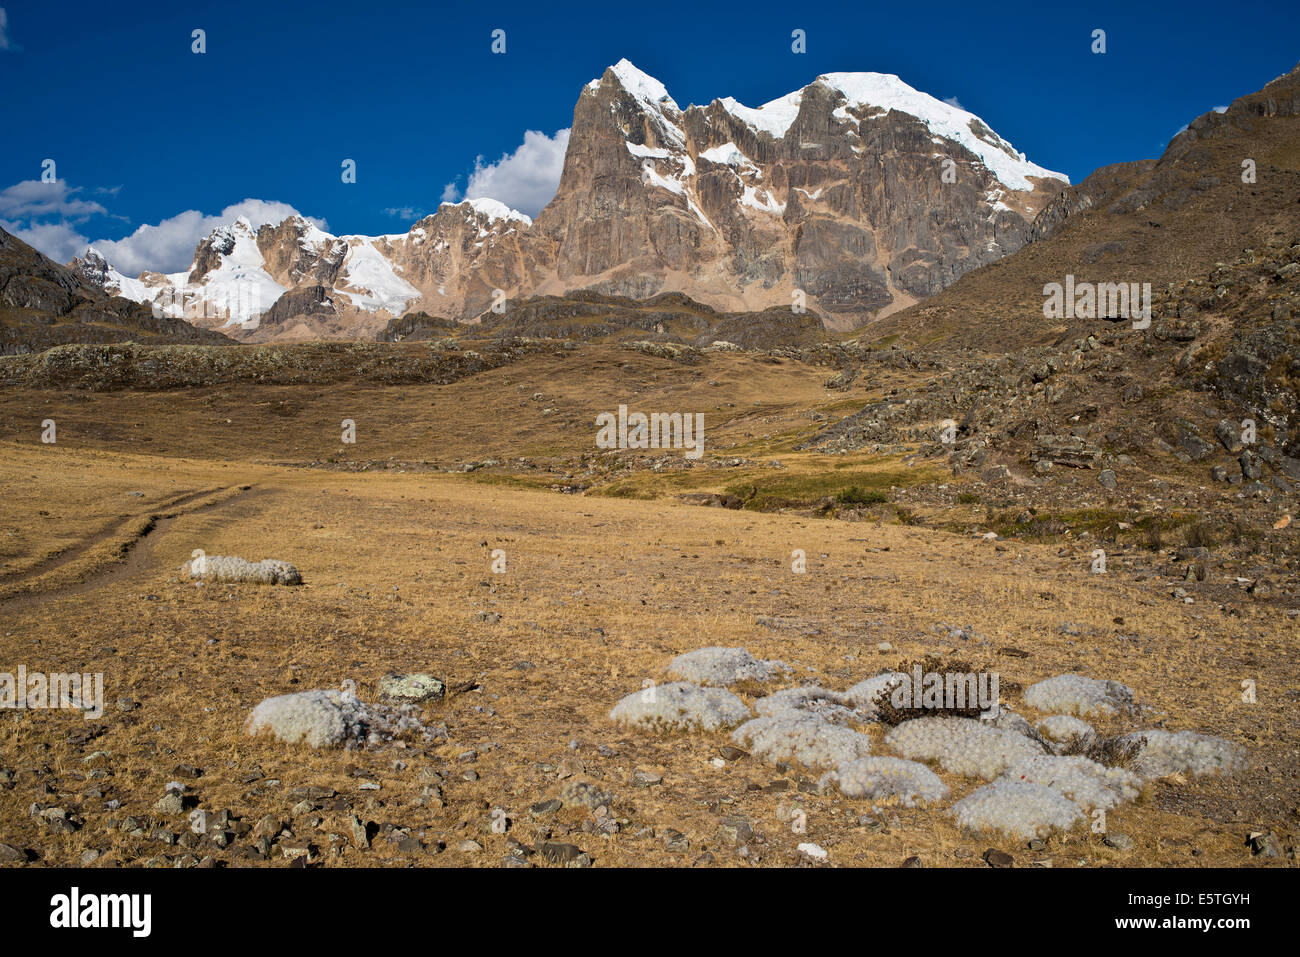 Old Man Cacti (Cephalocereus senilis) growing in a high valley, at the back snow-capped mountains of the Cordillera Huayhuash Stock Photo